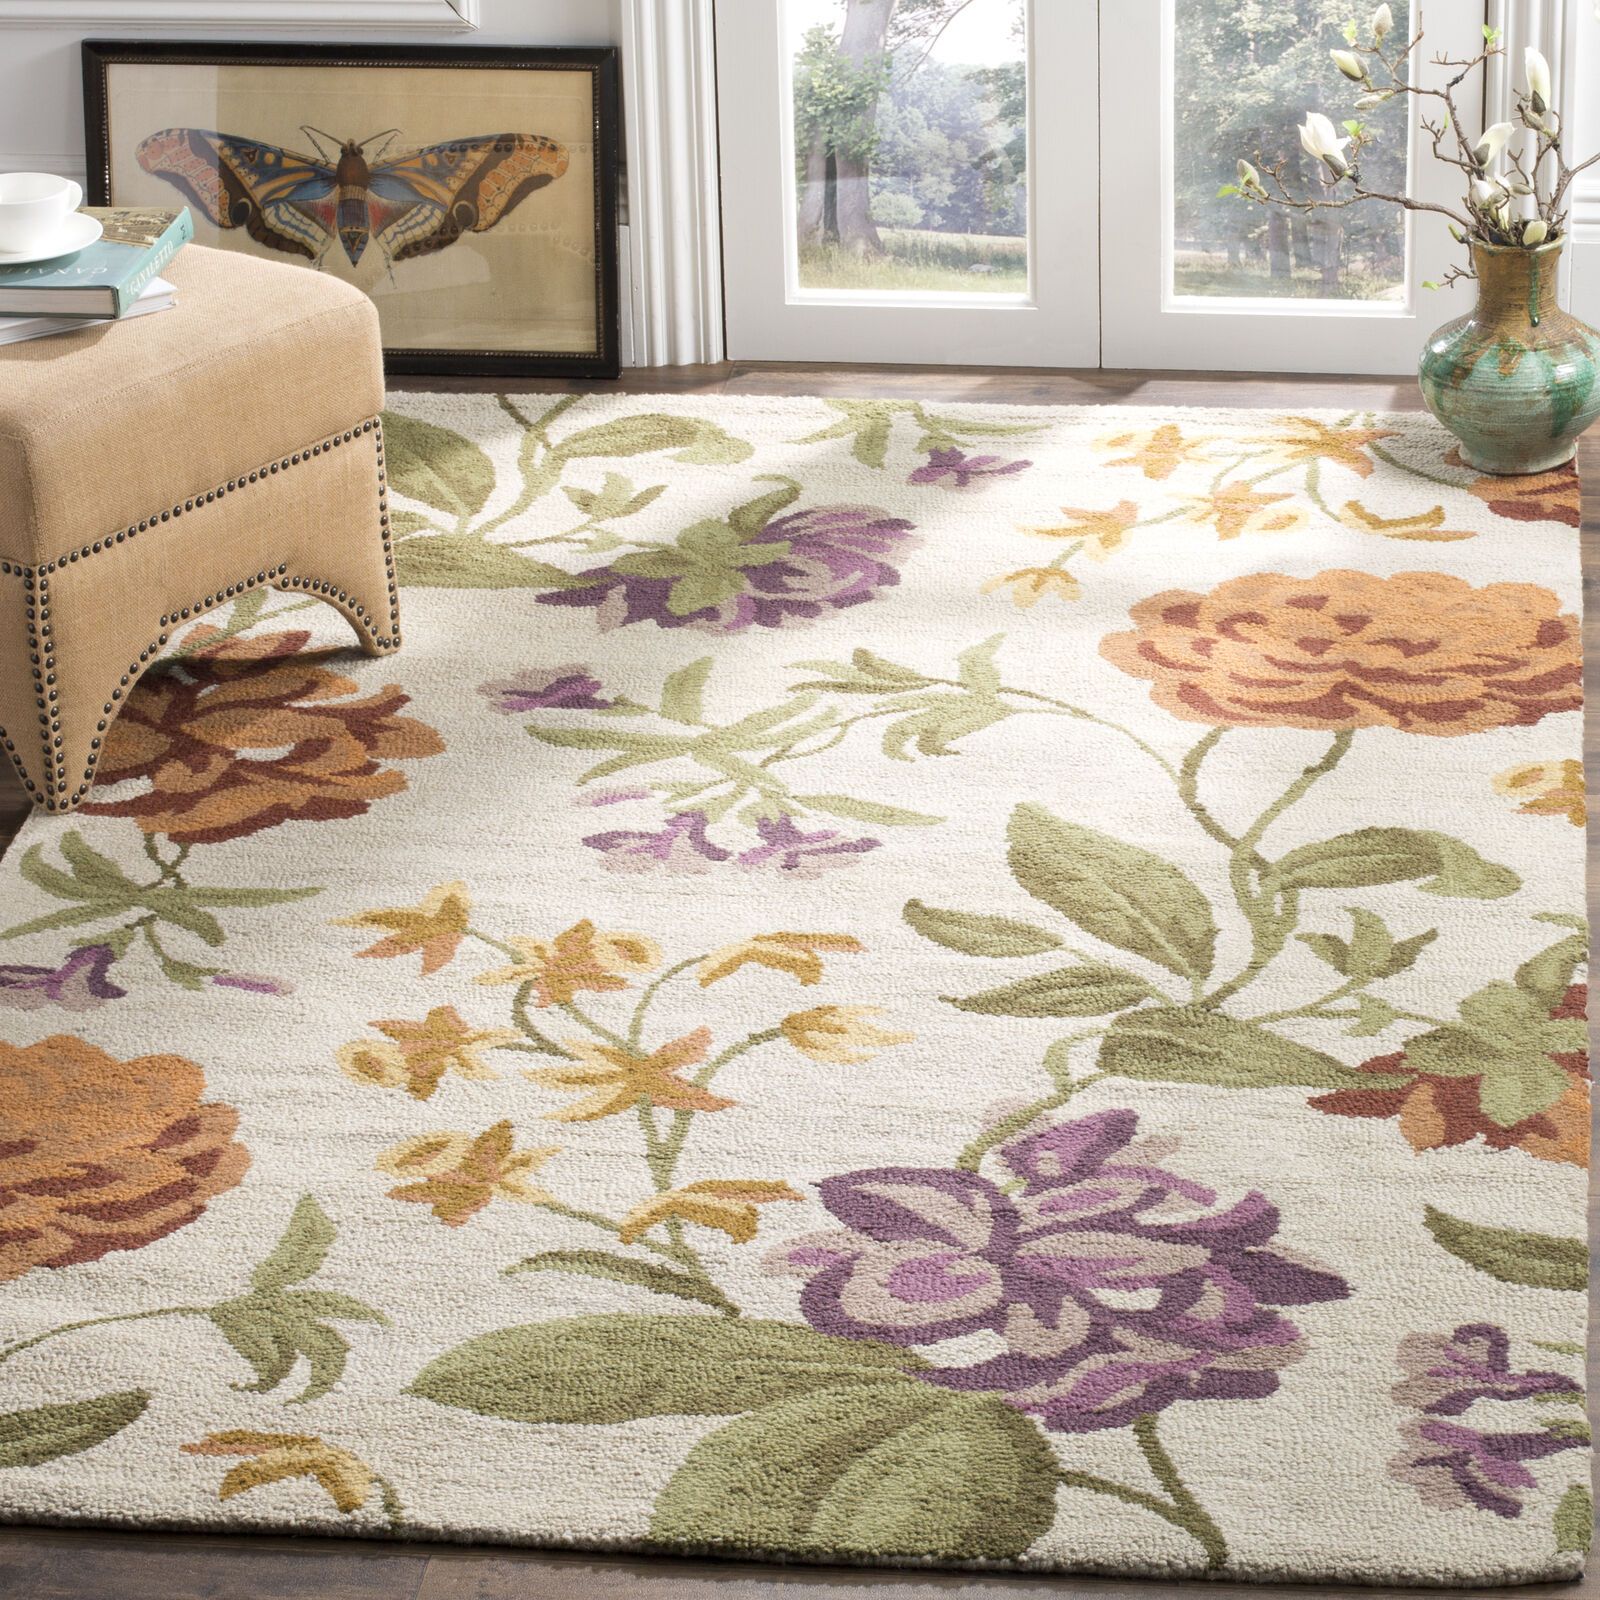 Safavieh Blossom Ivory / Multi Area Rug Blm788b | Ebay In Ivory Blossom Rugs (View 12 of 15)